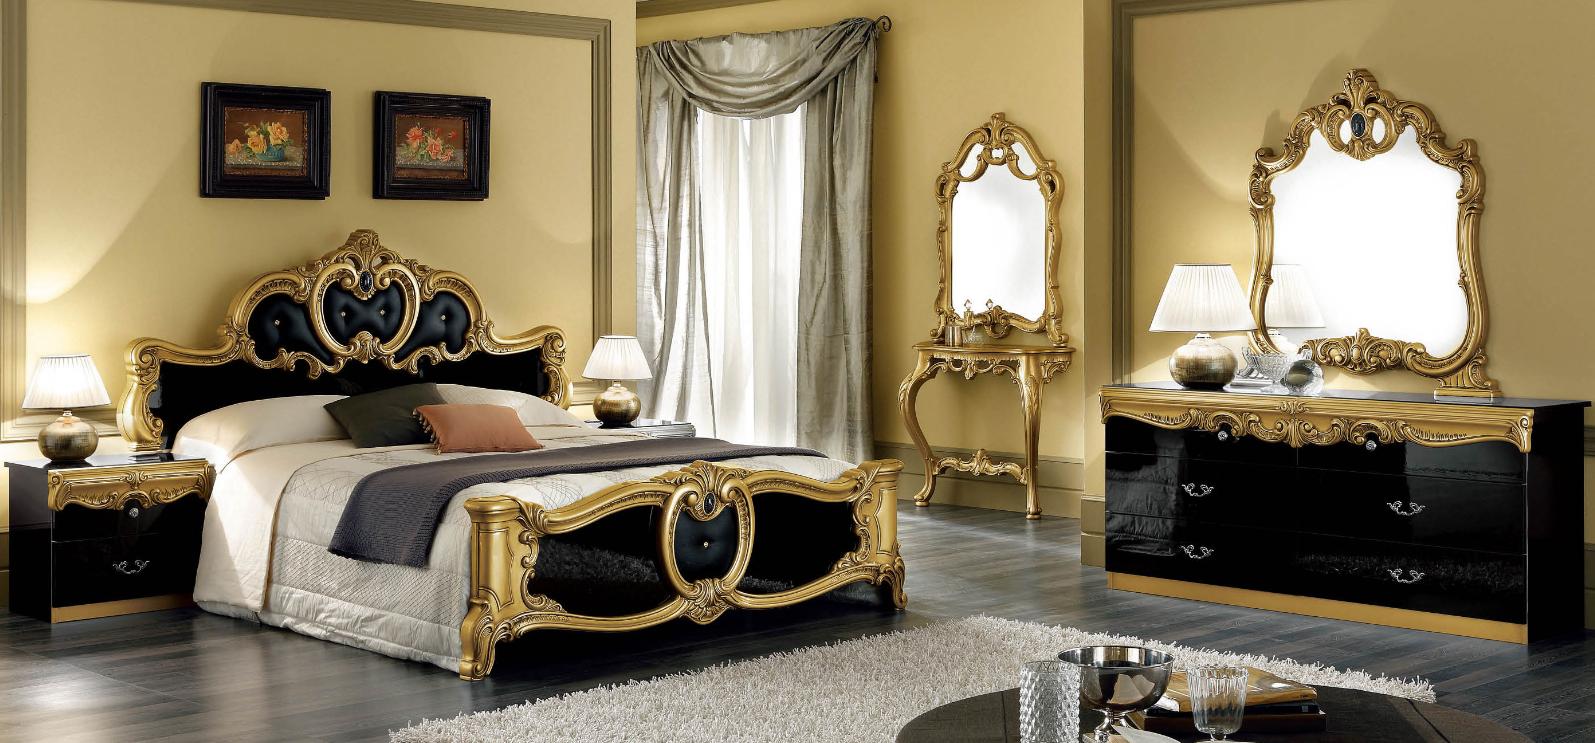 

    
ESF Barocco Luxury Glossy Black Gold King Bedroom Set 5 Classic Made in Italy
